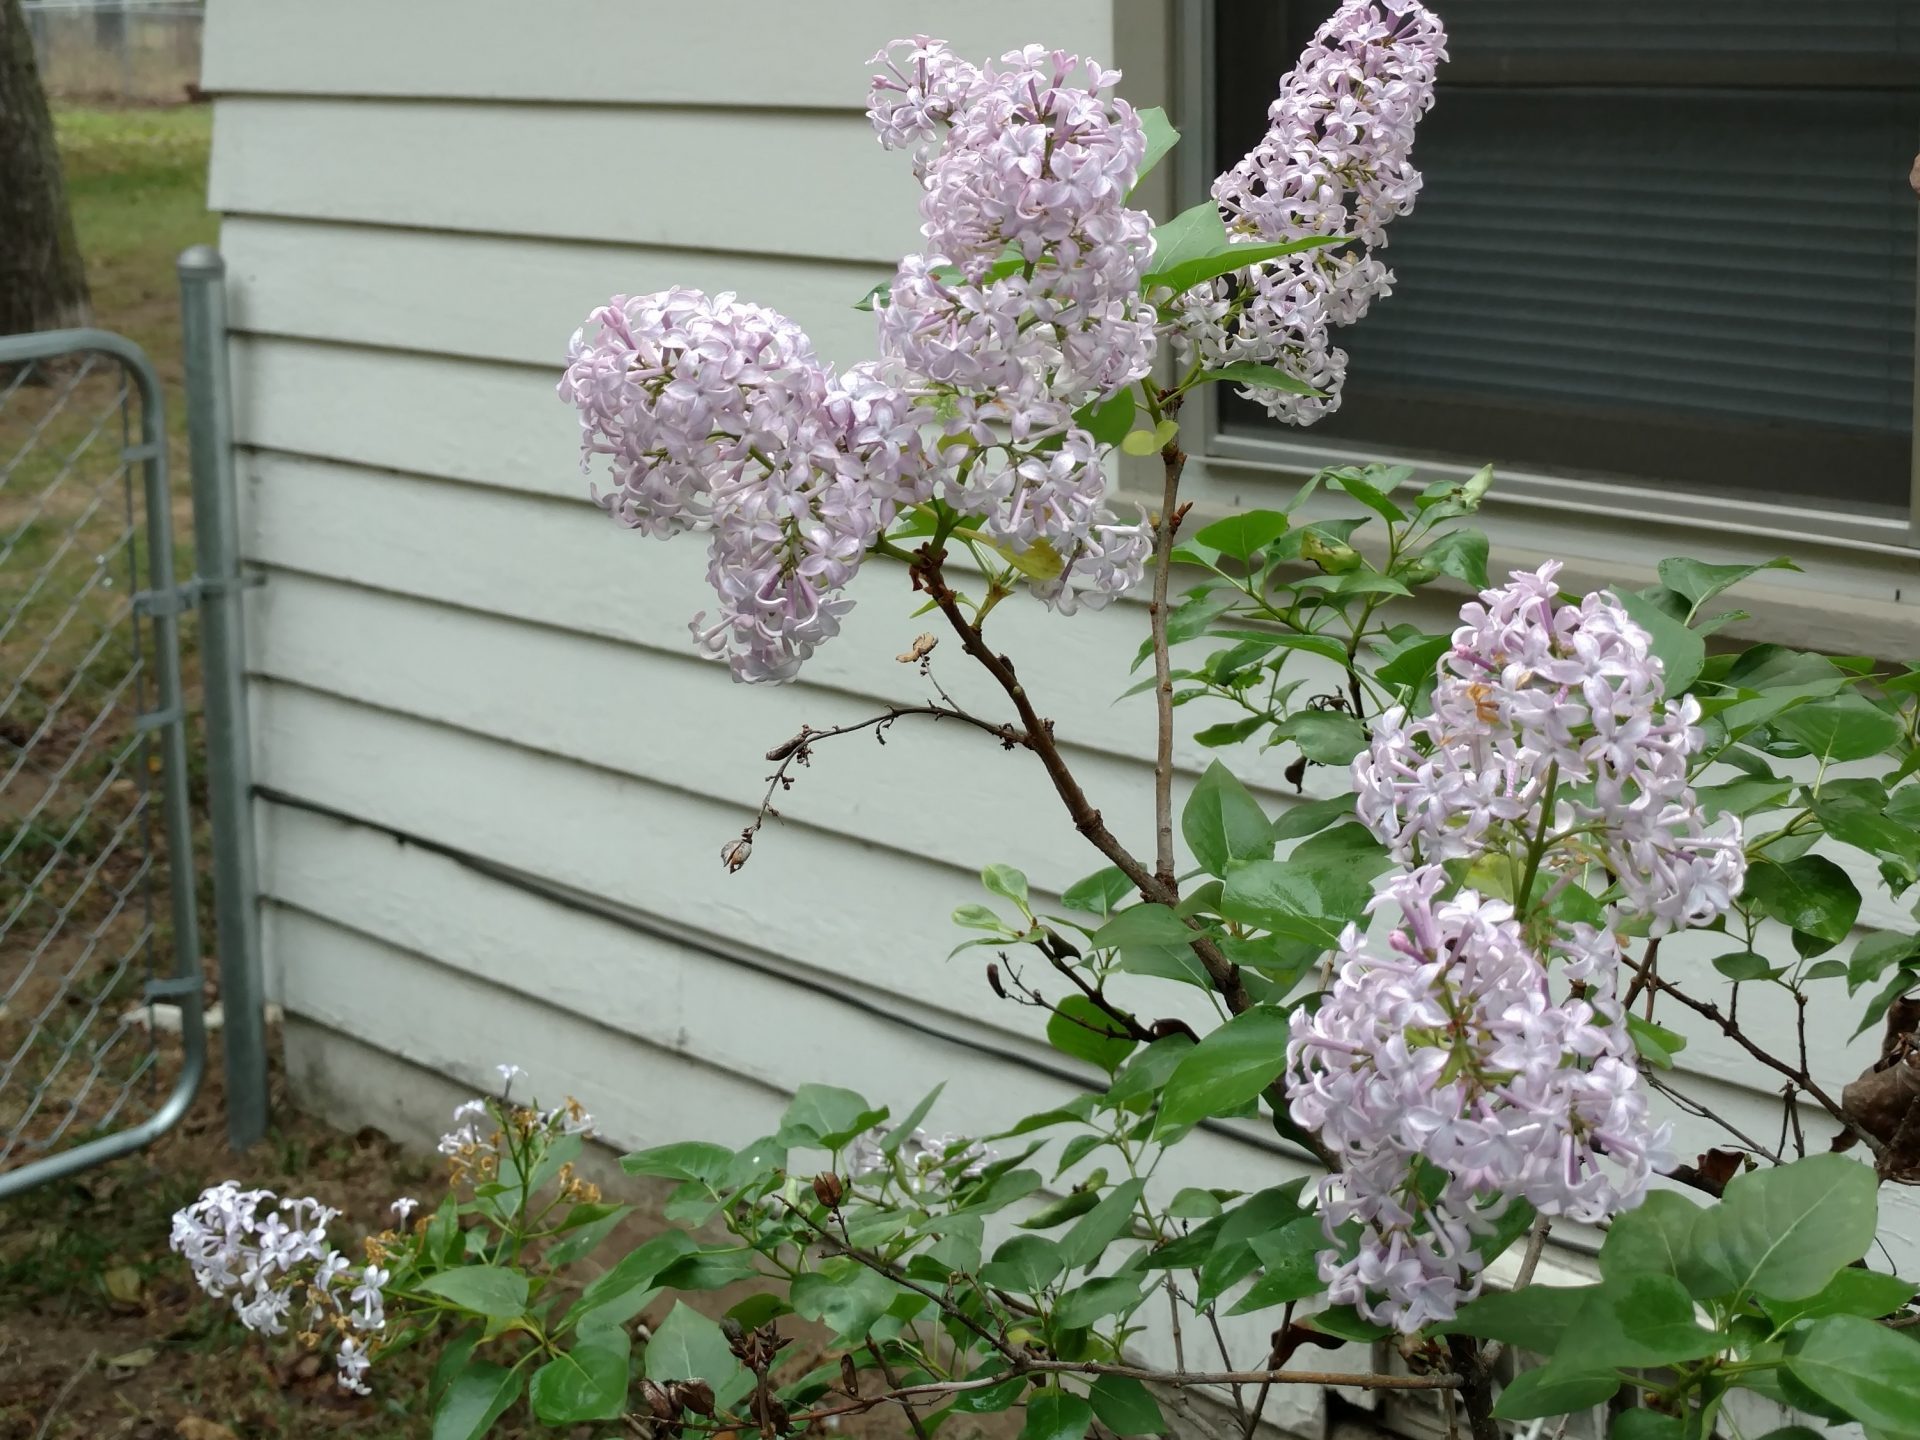 In Andrew Lynch's front yard, lilacs began to bloom in early winter, which Lynch found unusual.